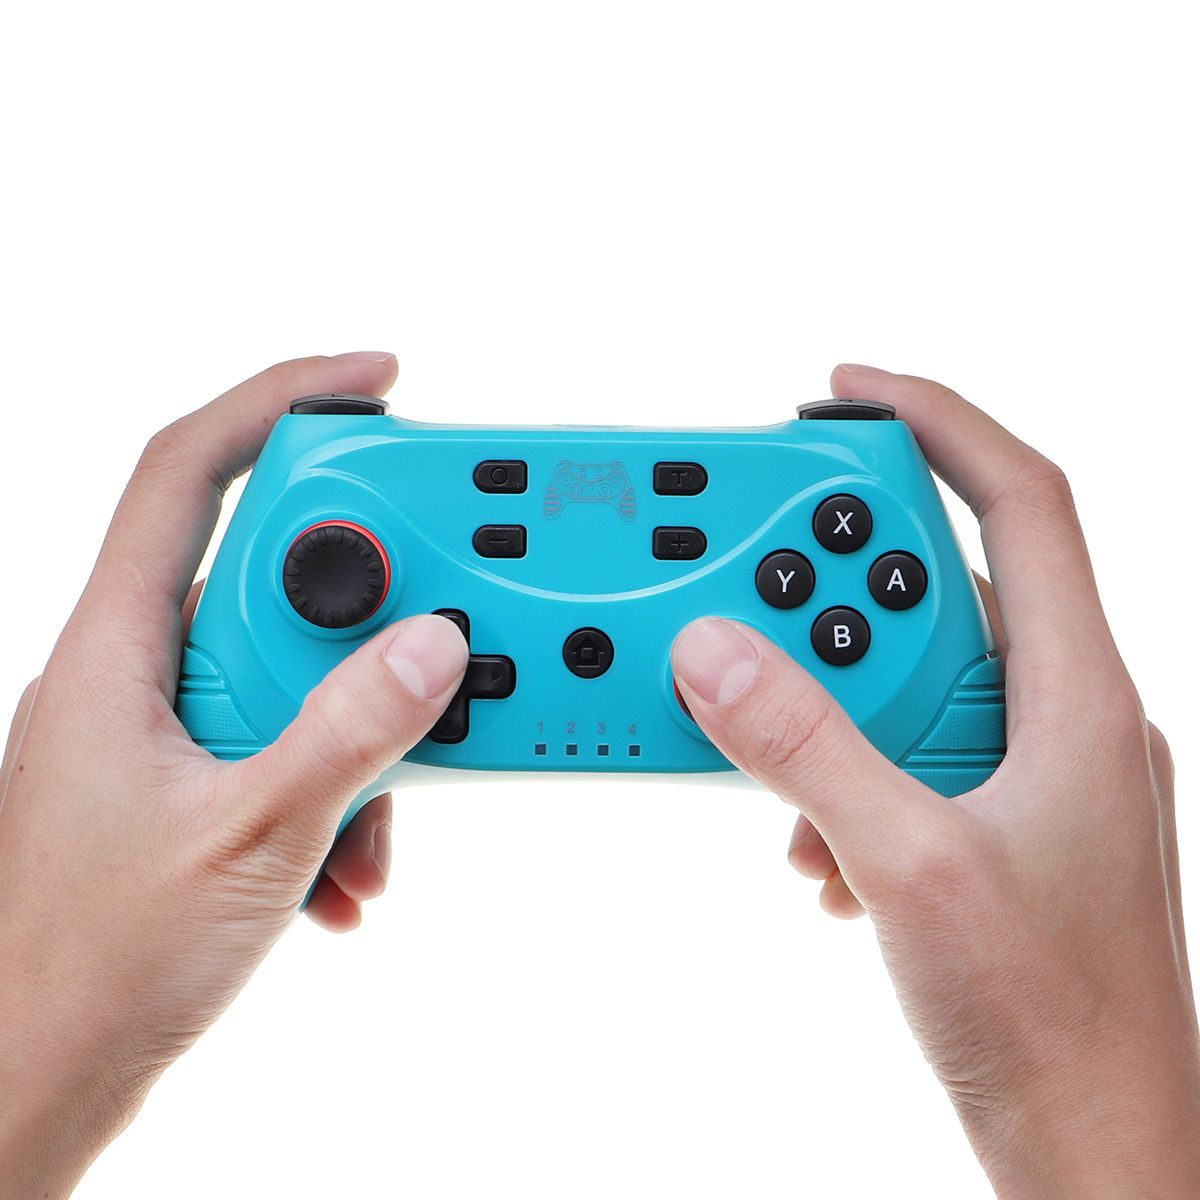 Wireless-Bluetooth-Switch-Game-Controller-Gamepad-with-Gyro-6-Axis-and-Dual-Vibration-for-Nintendo-S-1749172